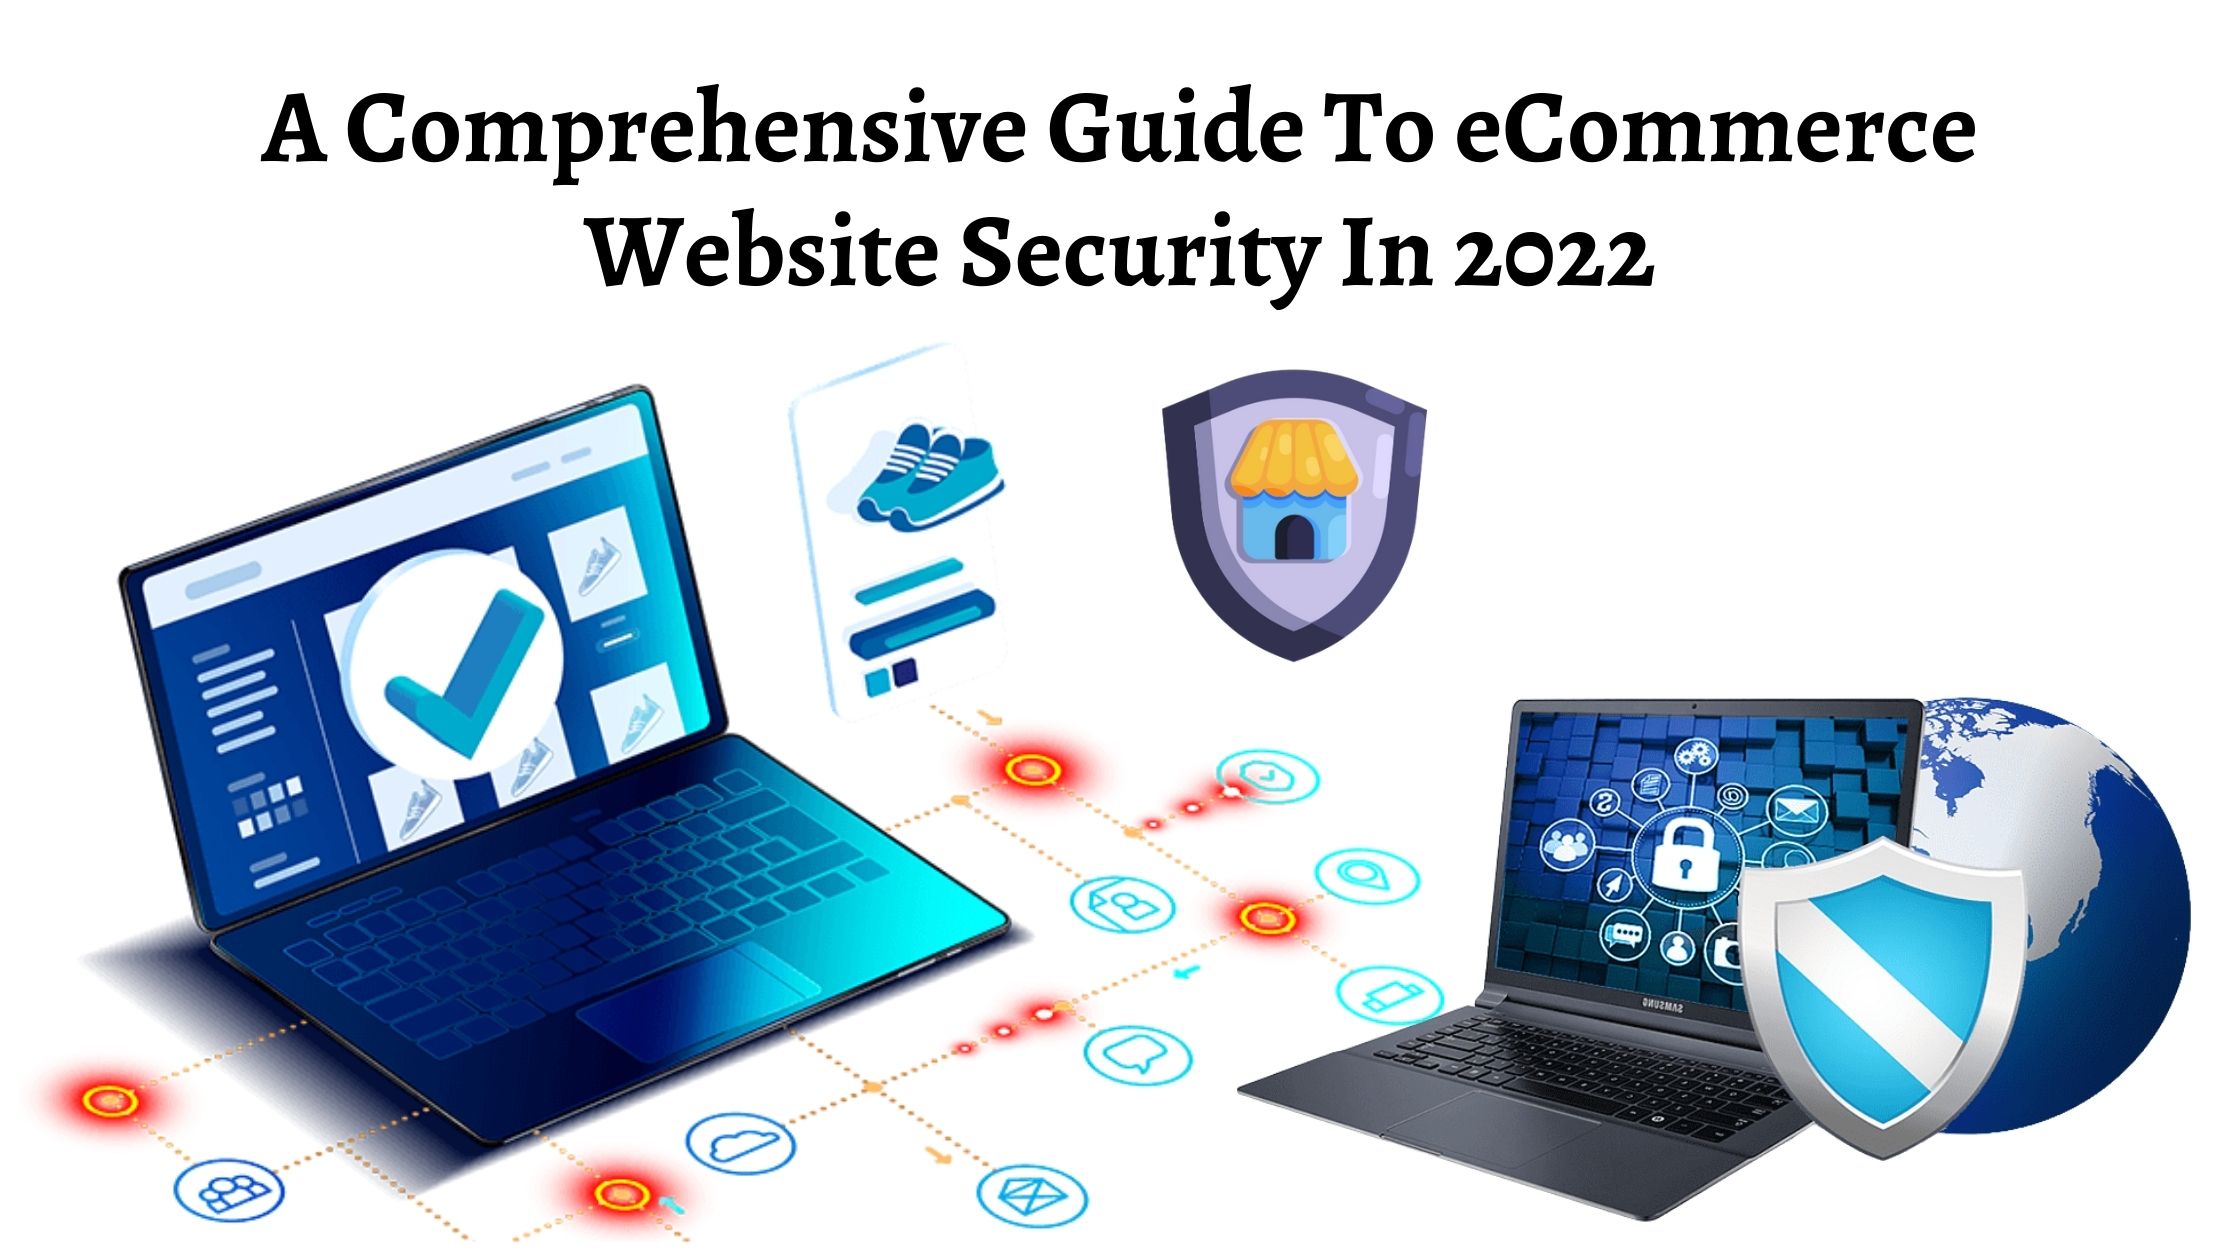 eCommerce Website Security Guide In 2023